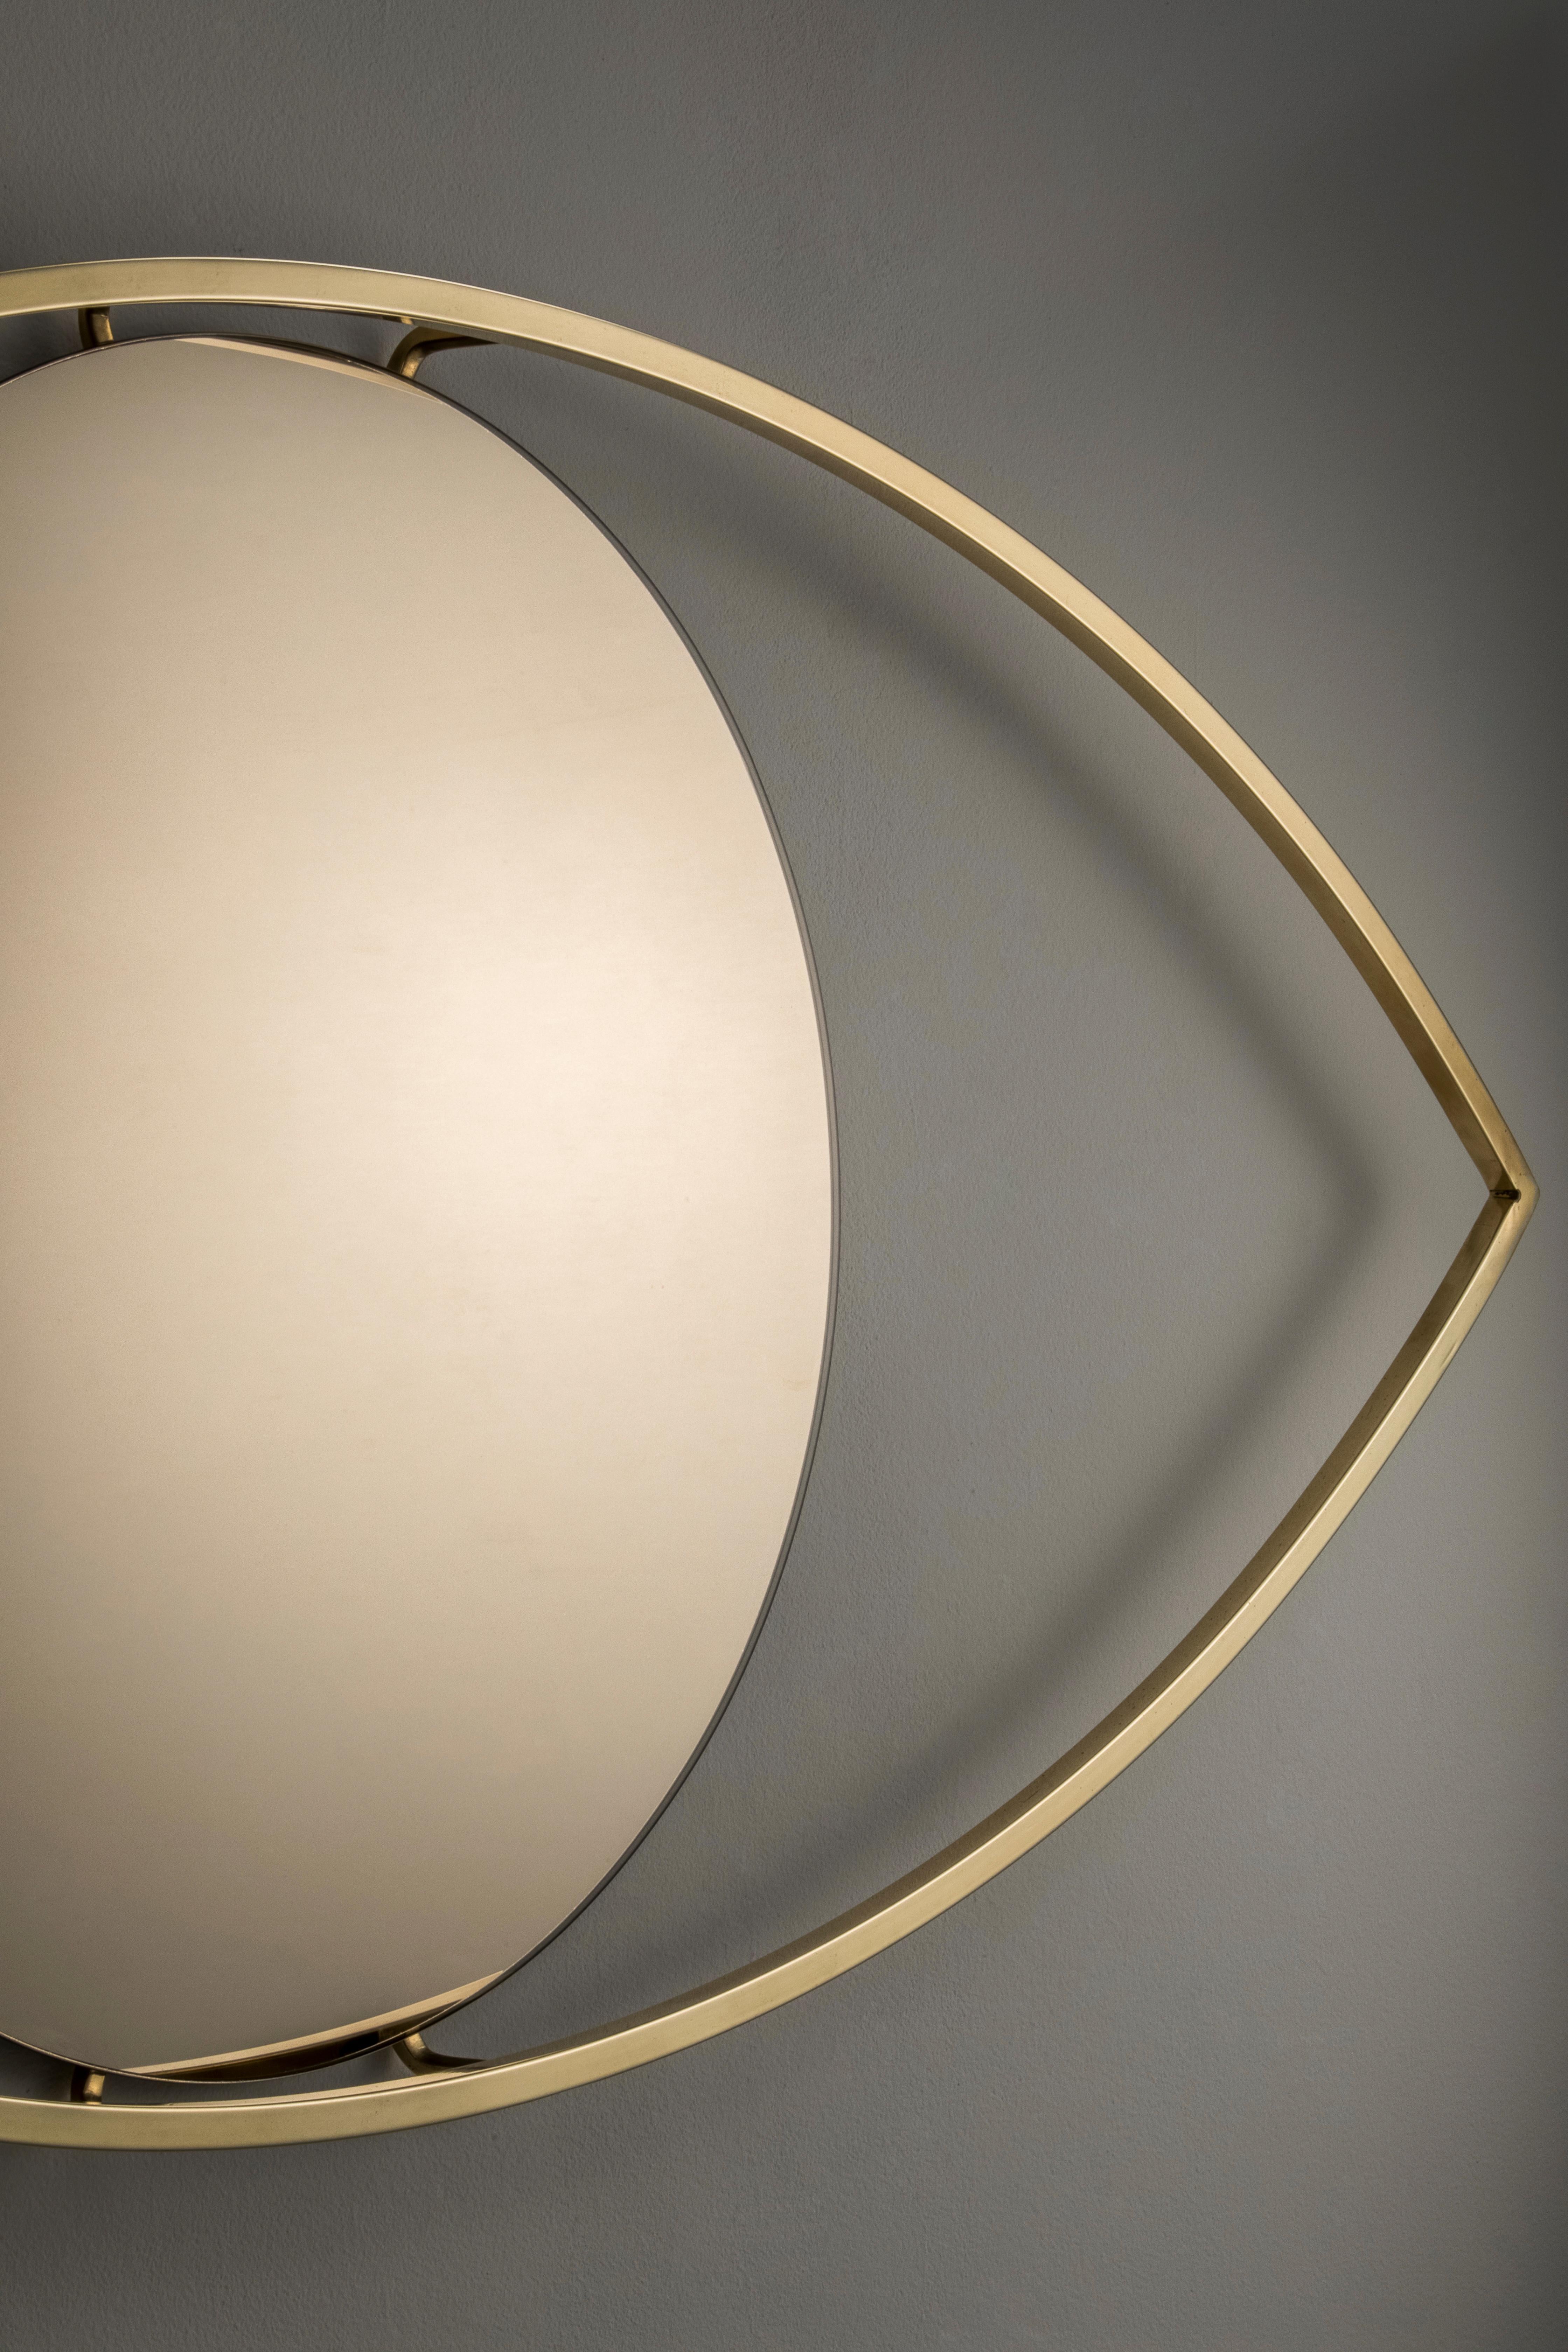 The Mirror Soul reflects the user in a positive, playful and mystical way. The piece can be used in multiple environments such as entrance hall, living rooms, dining room, lounges, bedroom, toilets. Its a handcrafted piece, made with polished brass